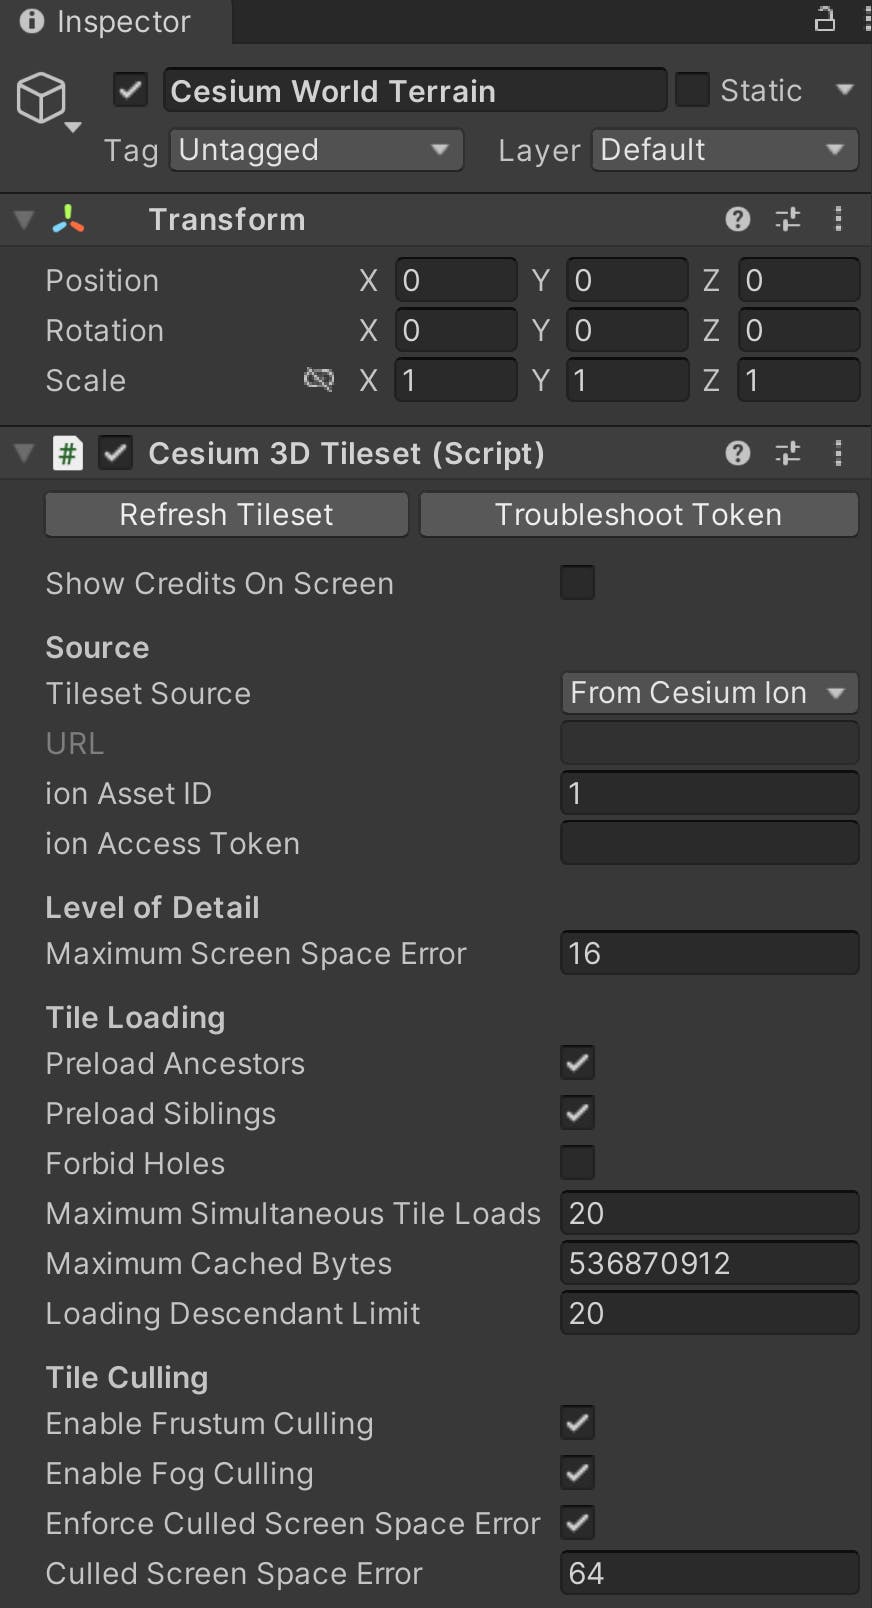 More info about Cesium World Terrain in the Inspector window